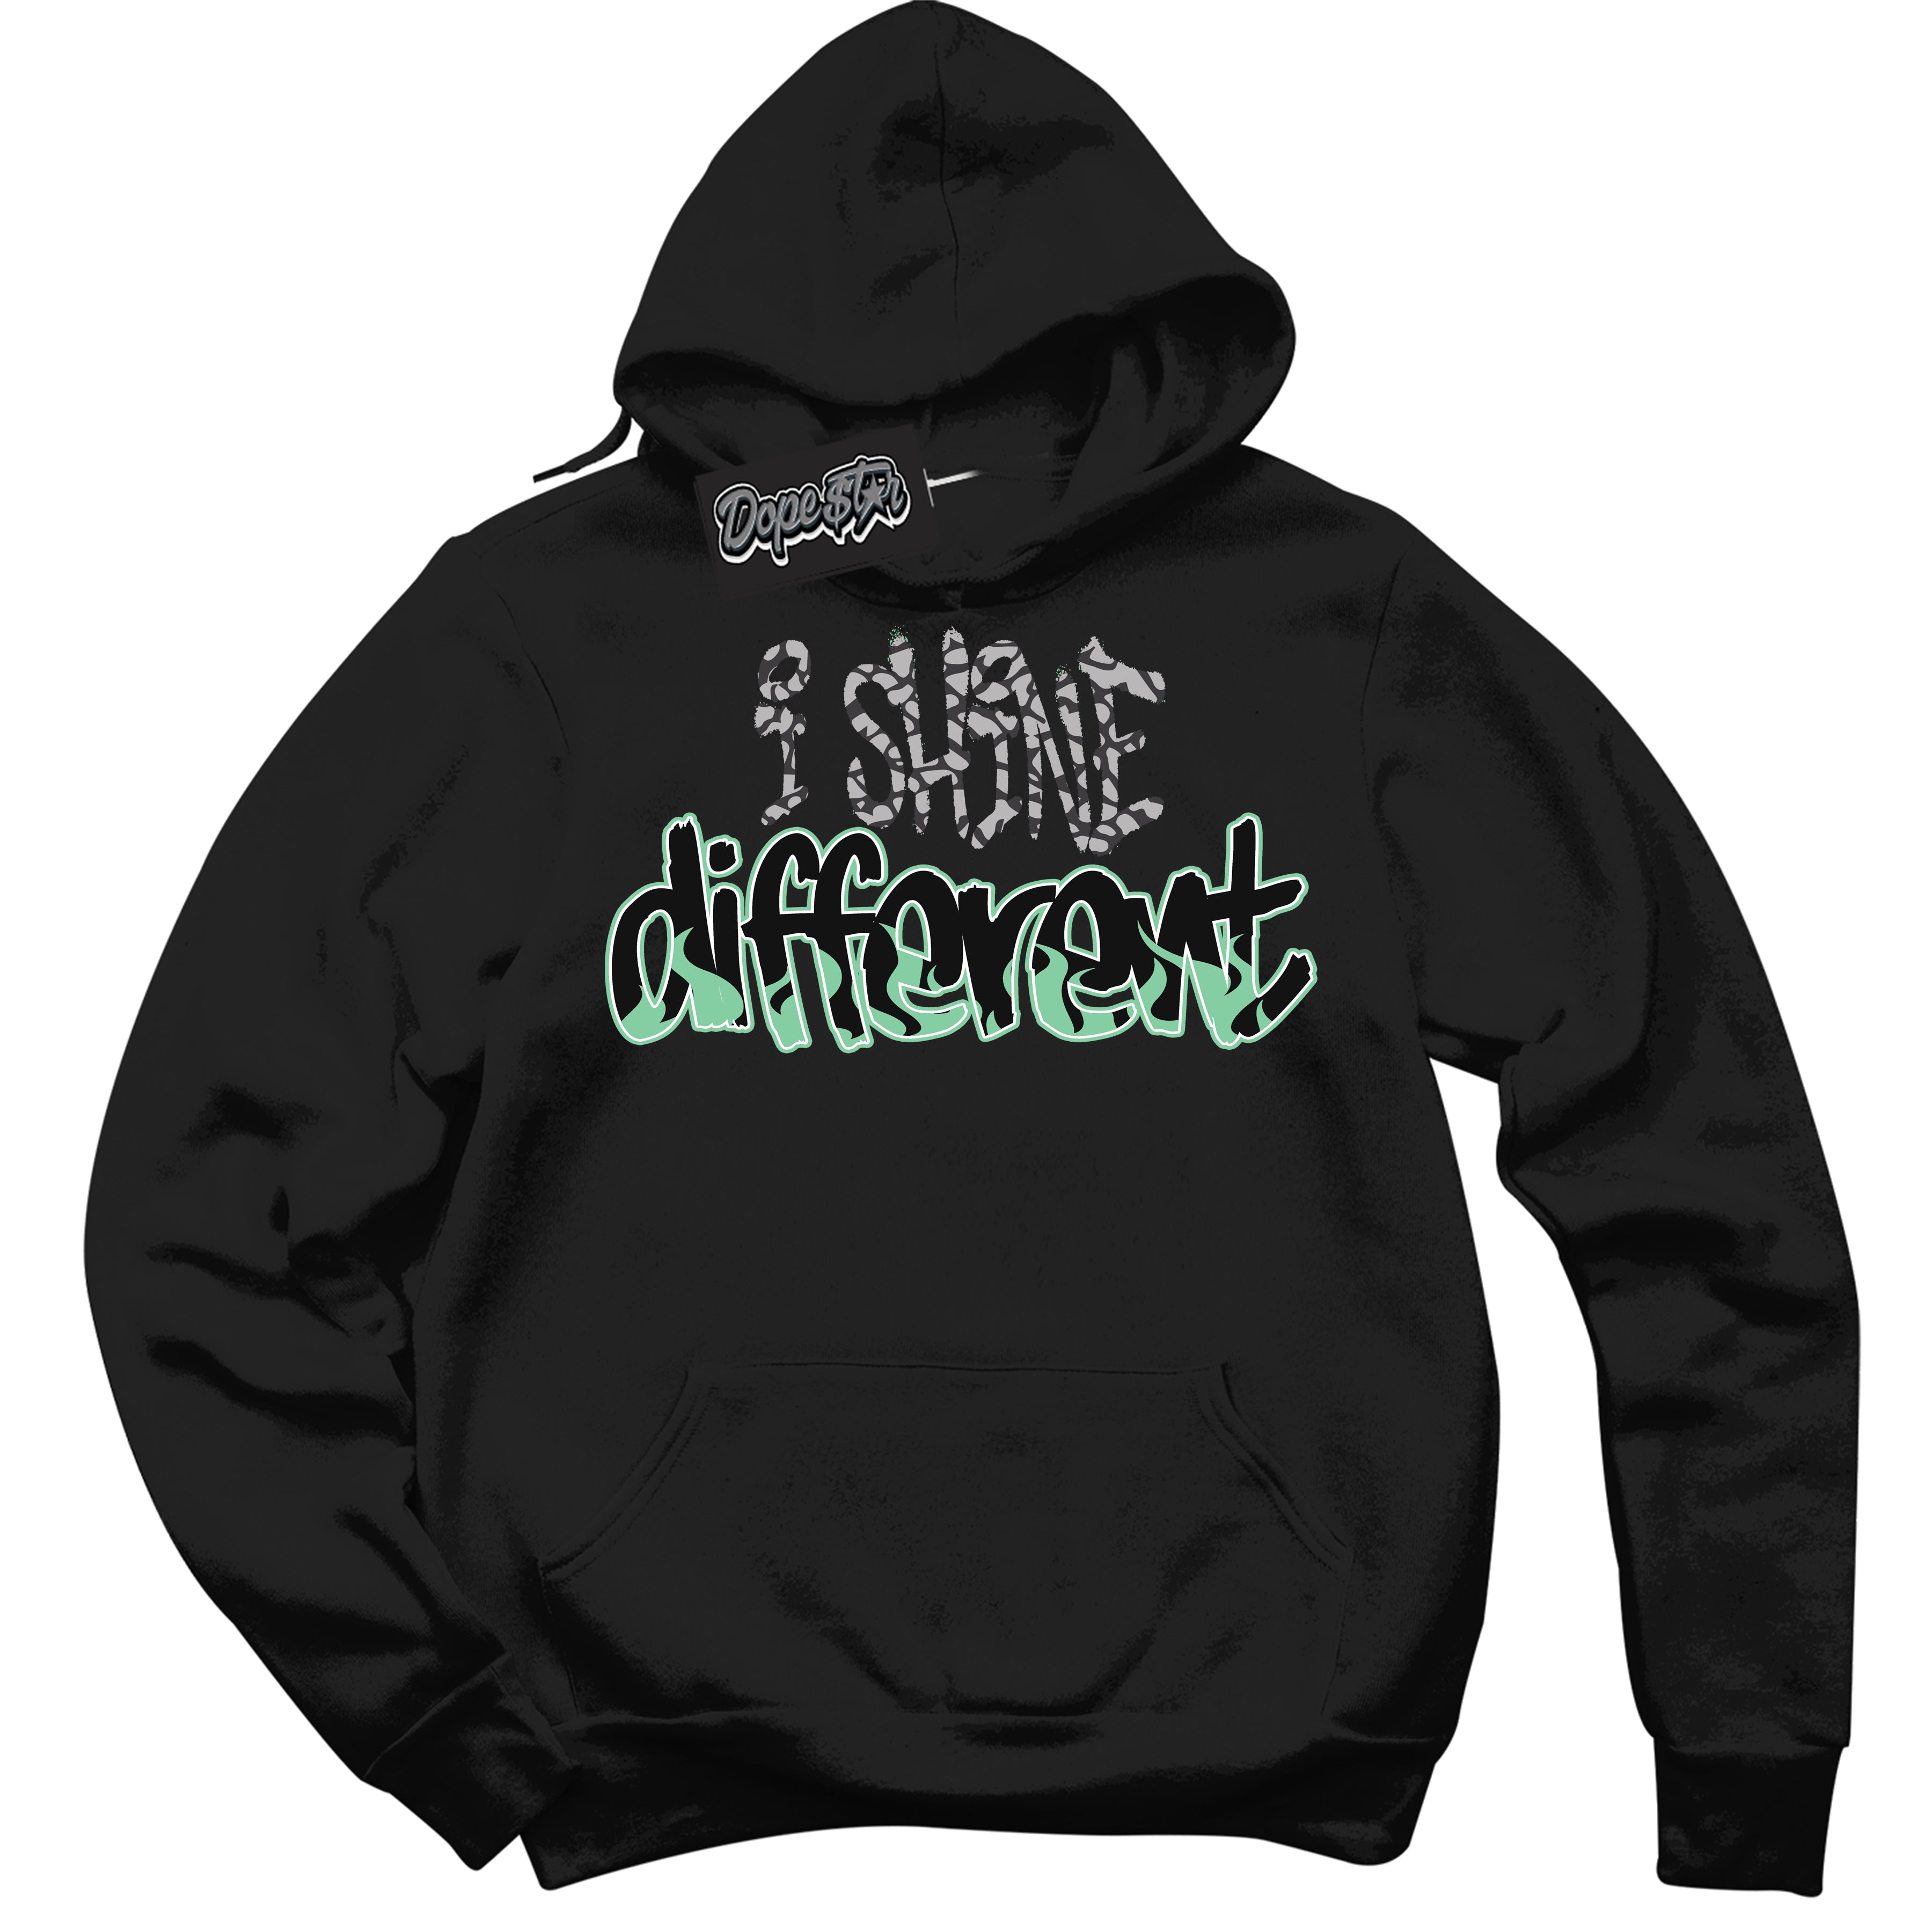 Cool Black Graphic DopeStar Hoodie with “ I Shine Different “ print, that perfectly matches Green Glow 3S sneakers